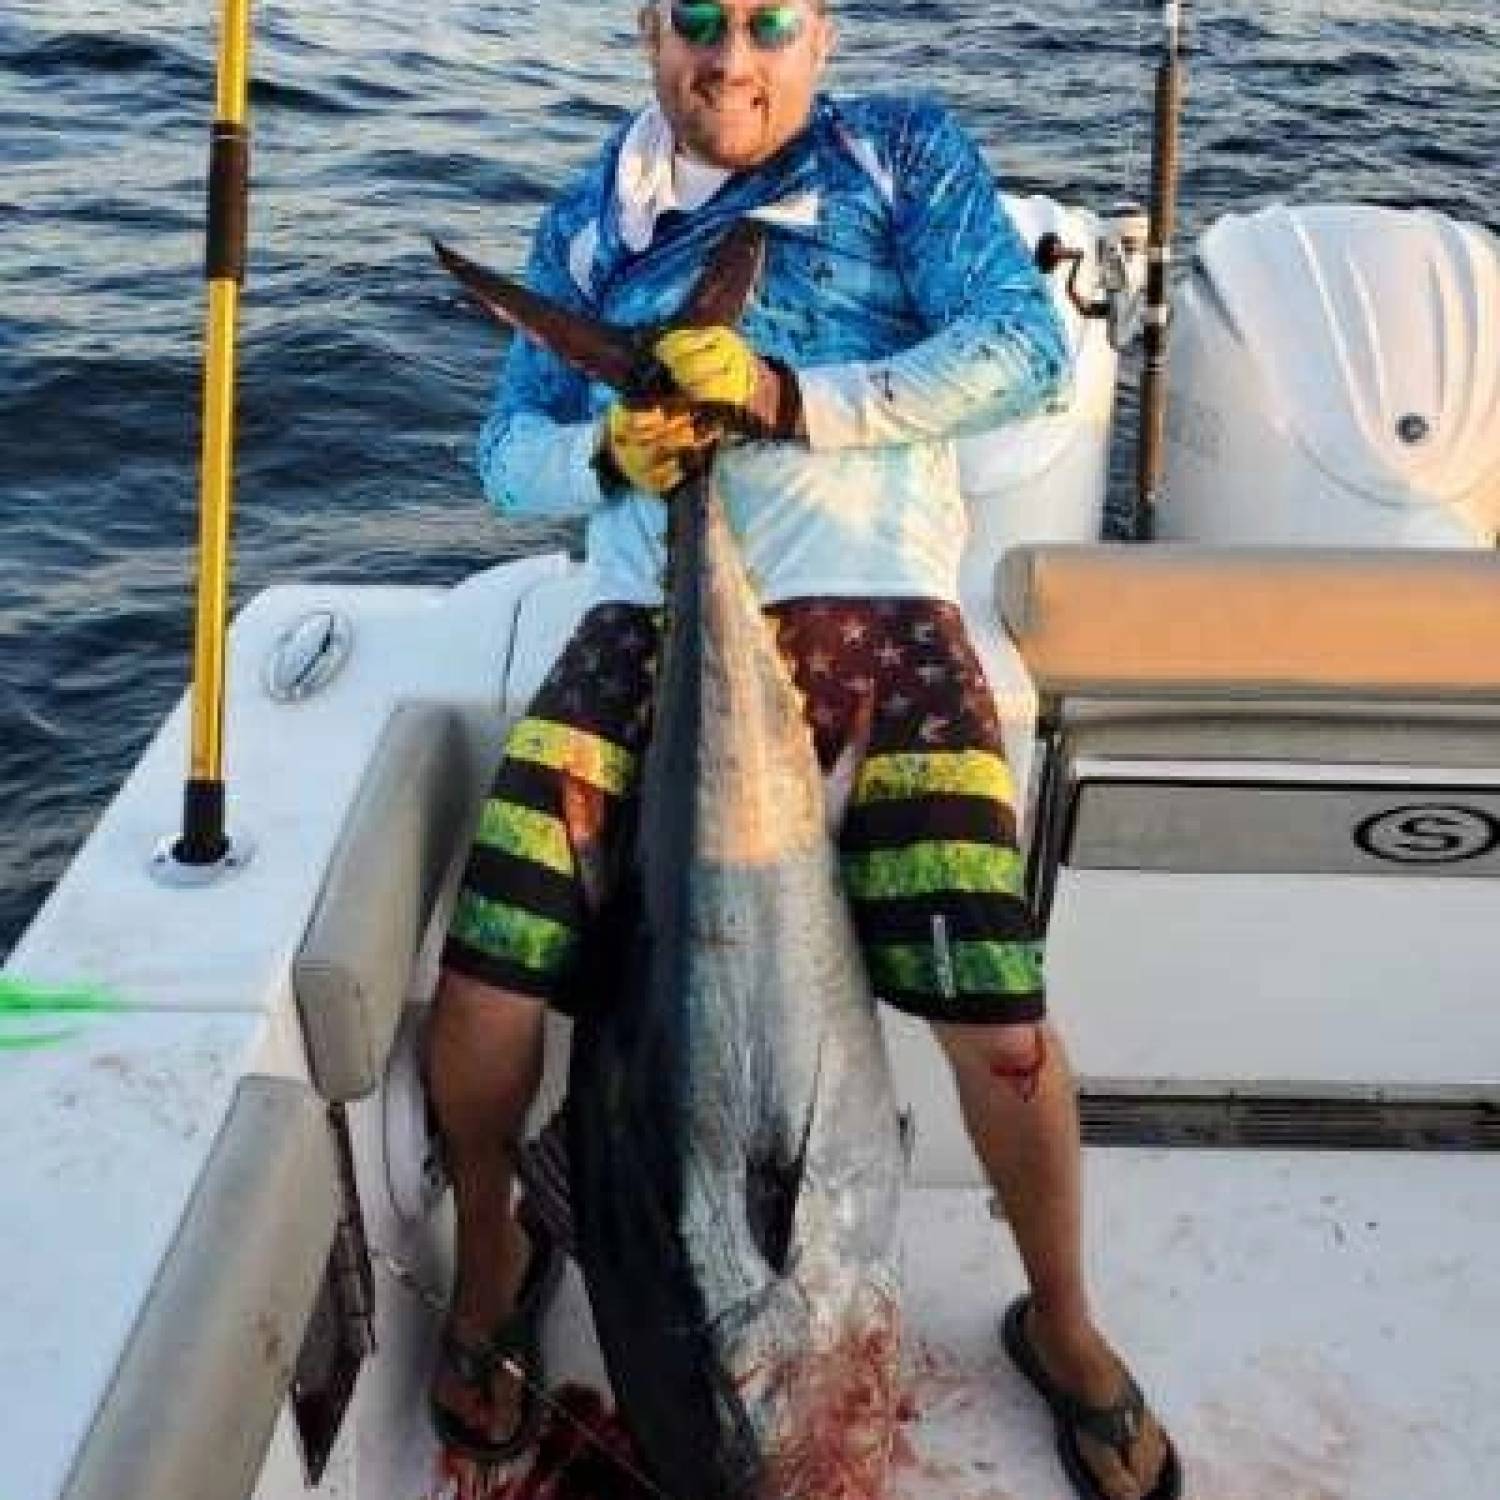 Title: Bluefin - On board their Sportsman Open 302 Center Console - Location: Little italy atlantic ocean. Participating in the Photo Contest #SportsmanJanuary2023